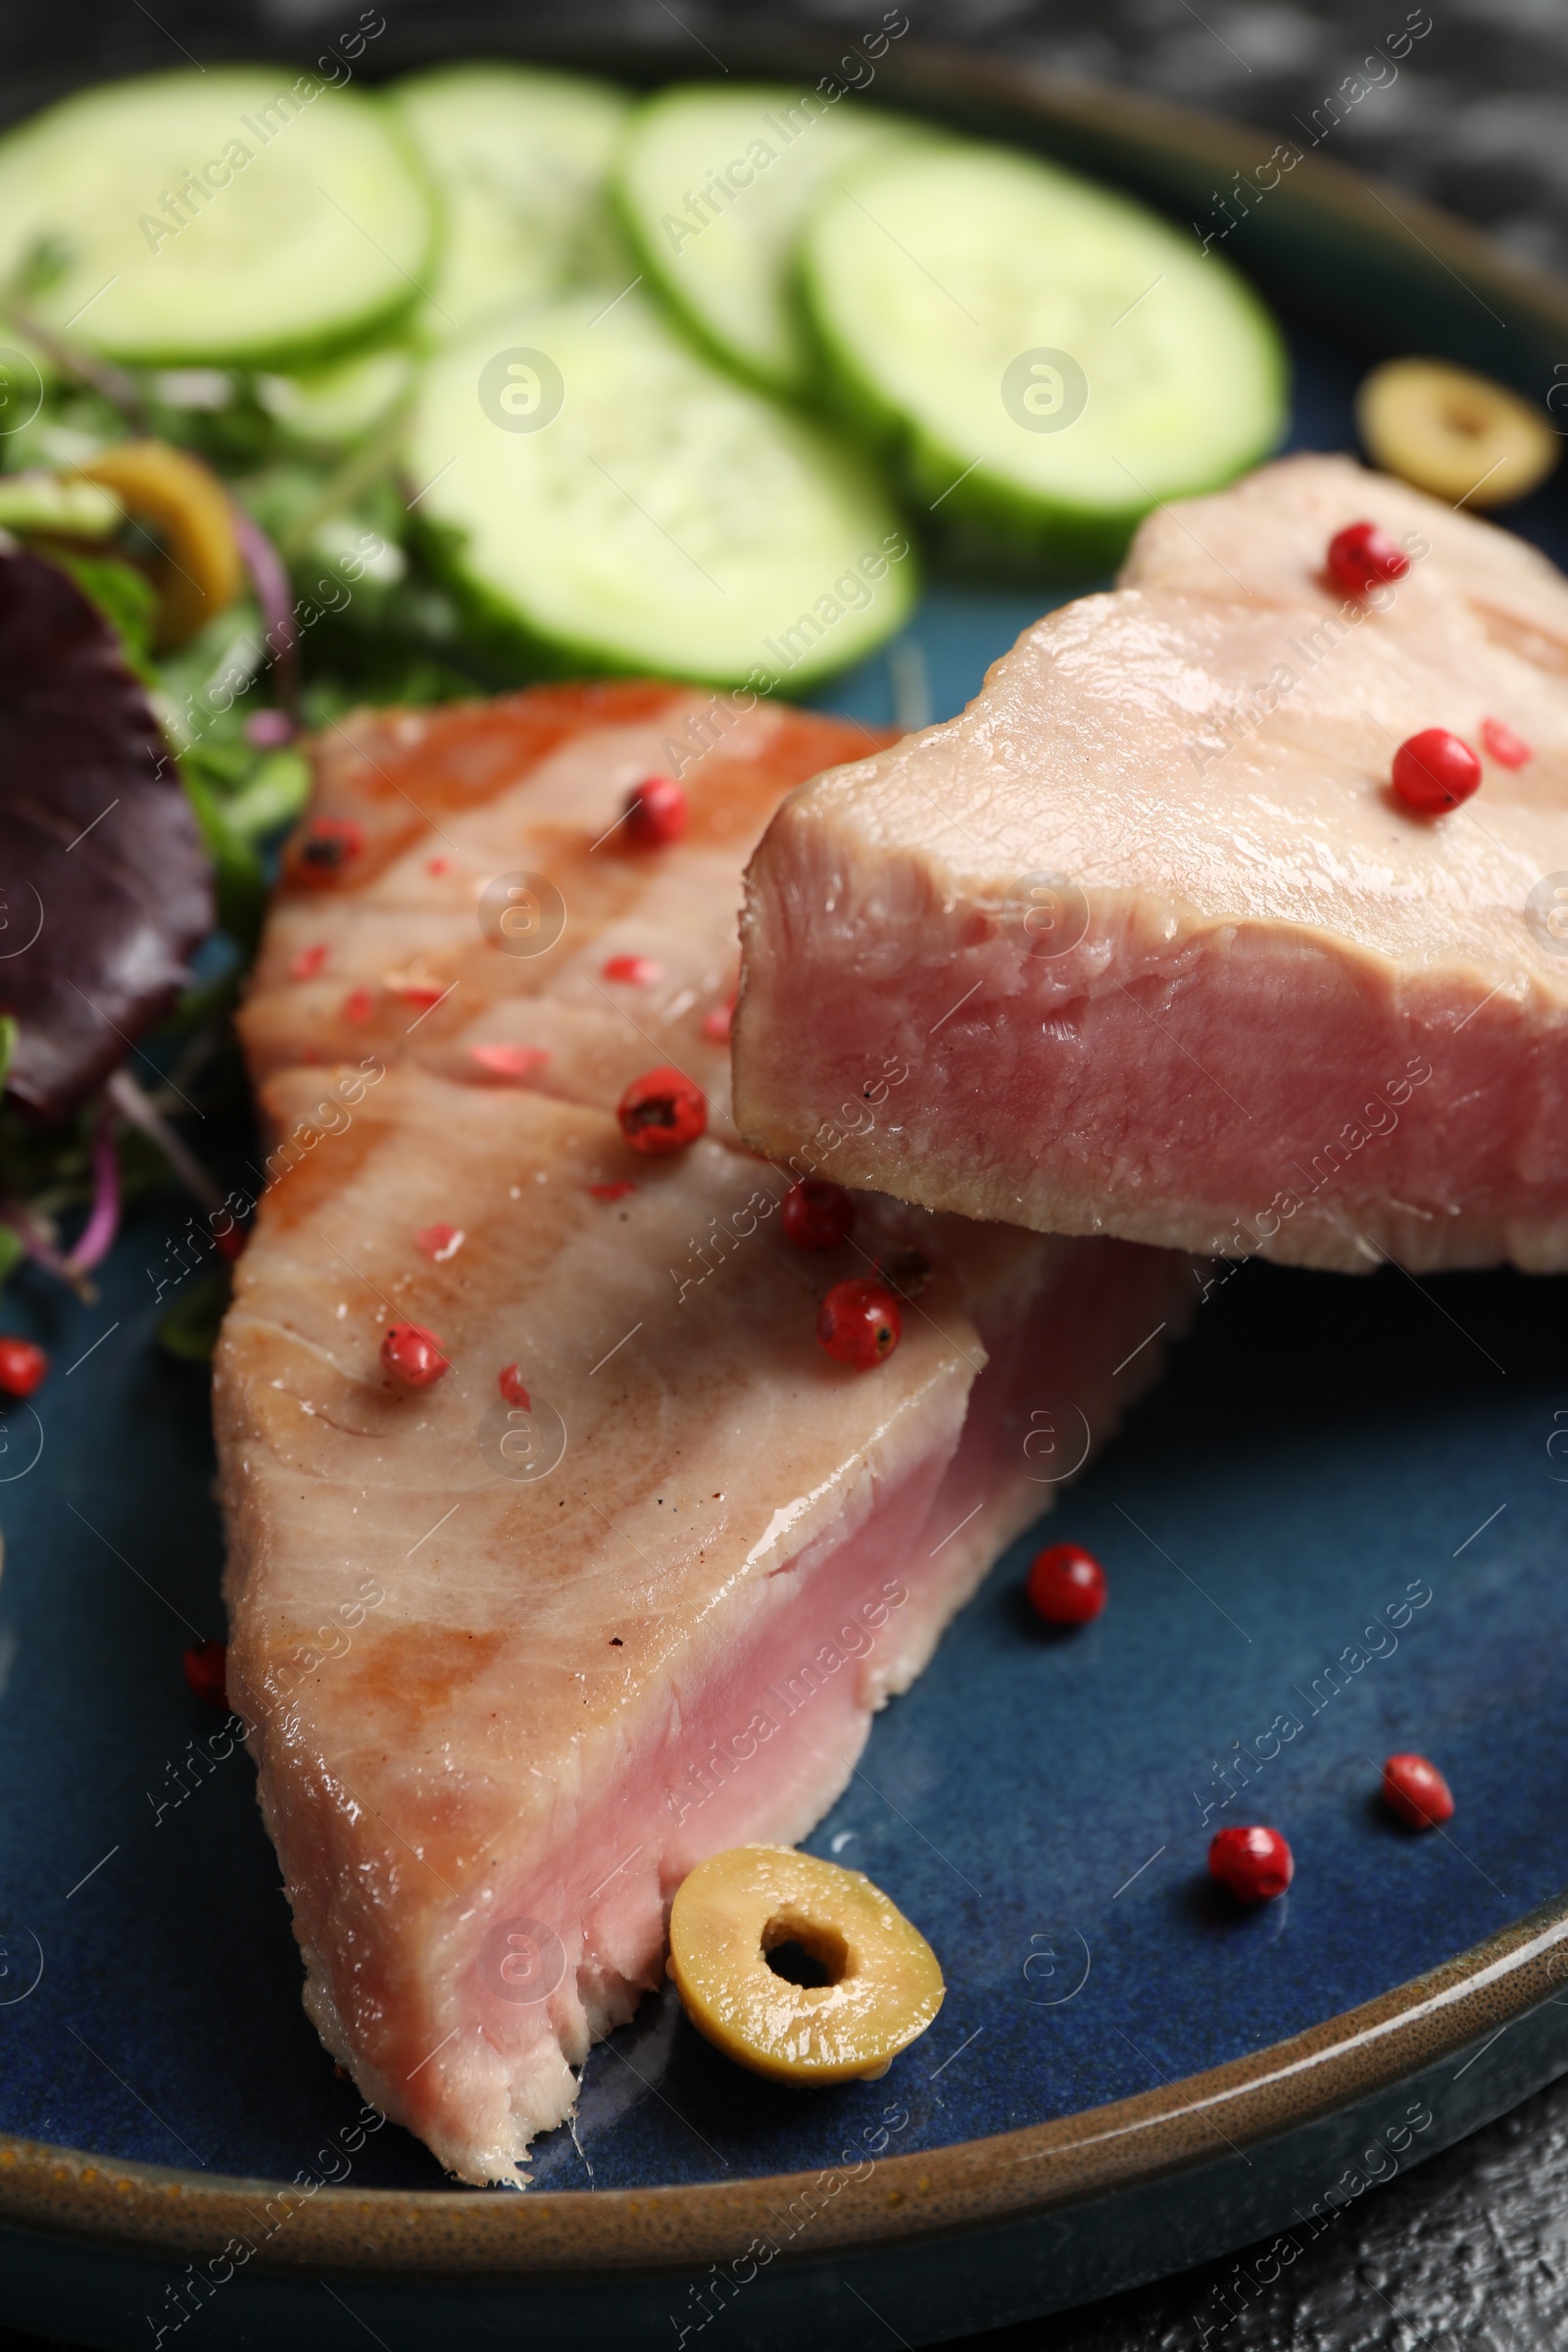 Photo of Pieces of delicious tuna with olive and spices on plate, closeup